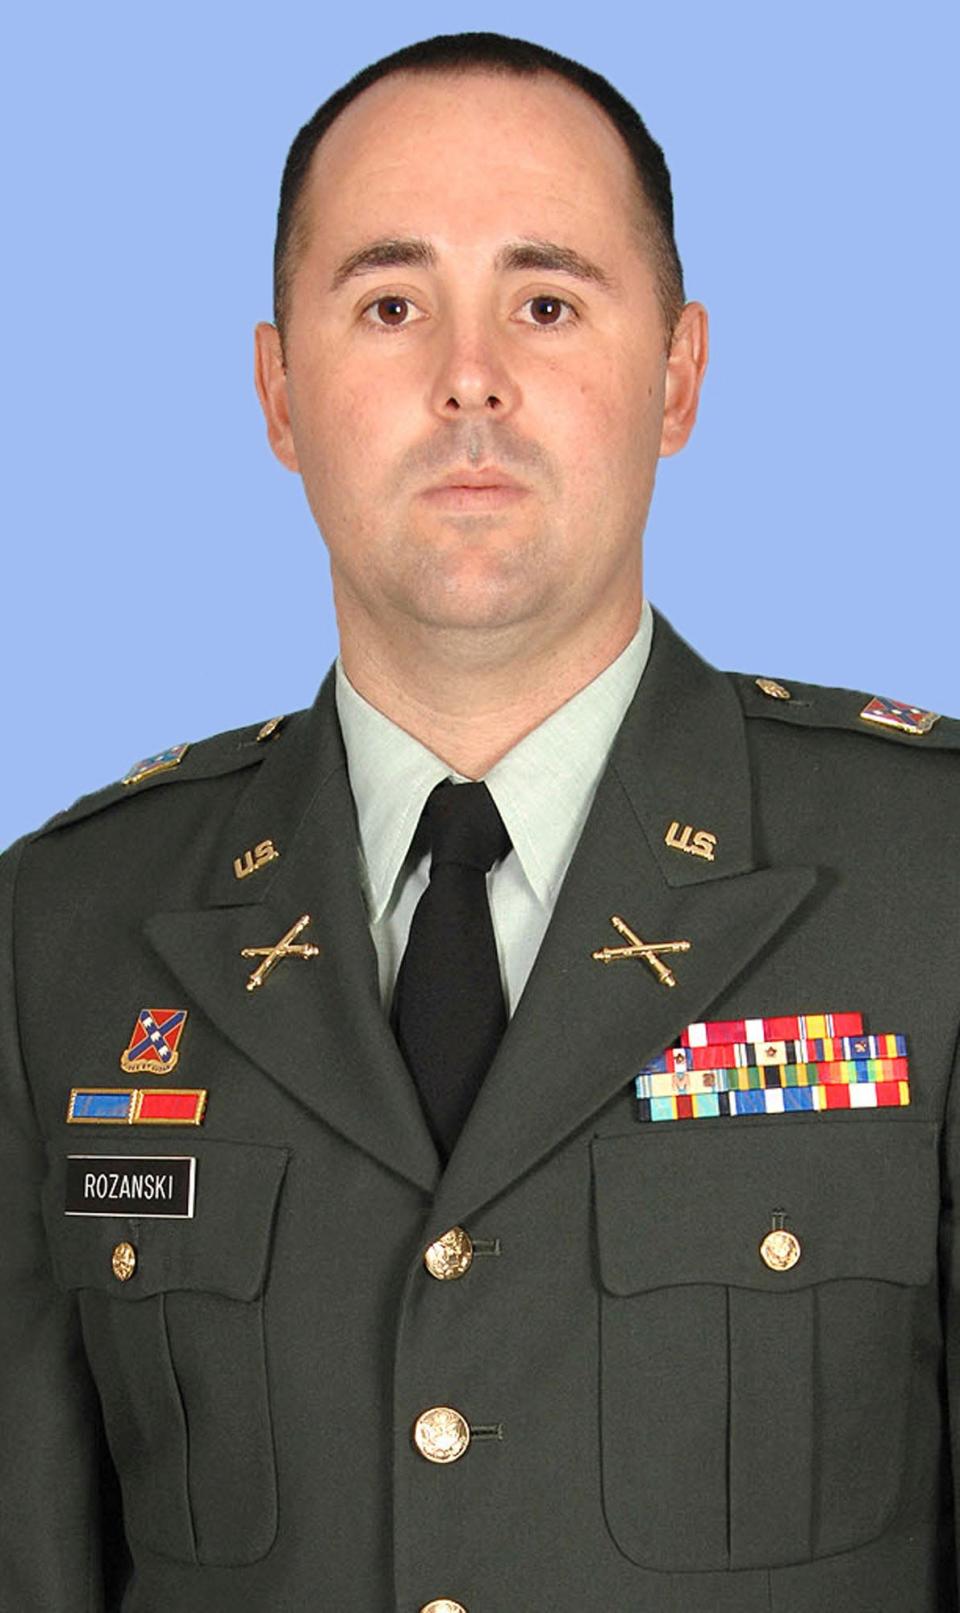 Ohio National Guard Capt. Nicholas Rozanski. The U.S. Defense Department says Rozanski was among three members of the same Columbus-based National Guard unit killed in an attack in Faryab province in Afghanistan.